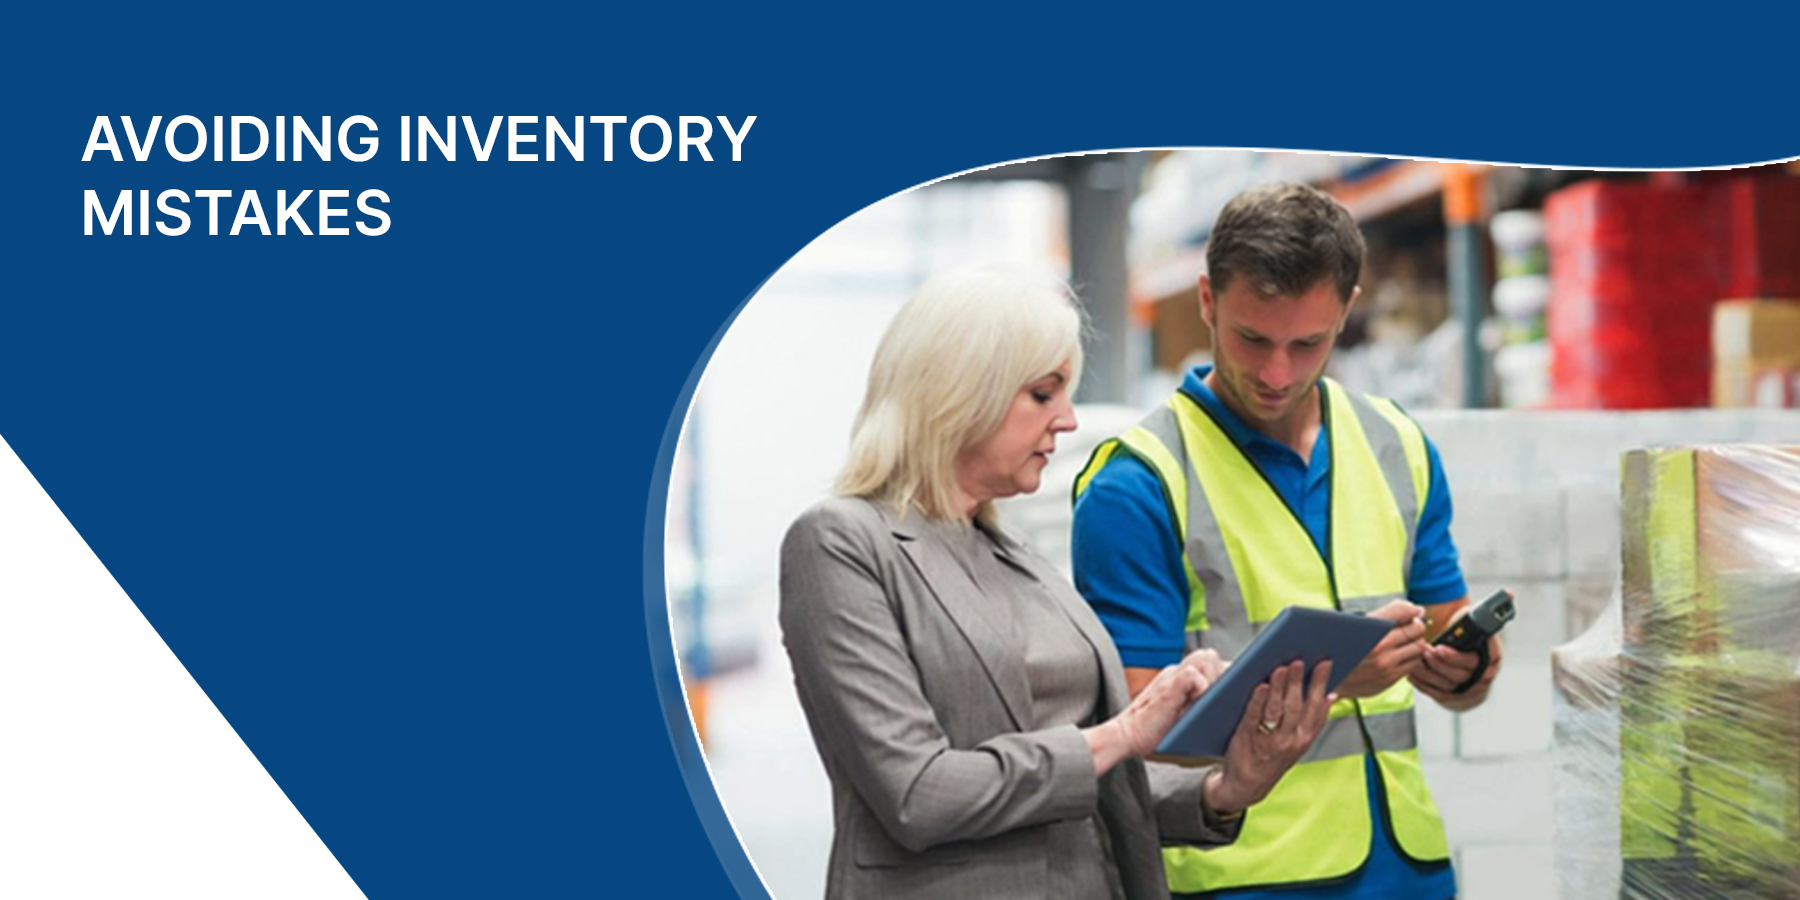 7 Common Inventory Management Mistakes and How to Avoid Them